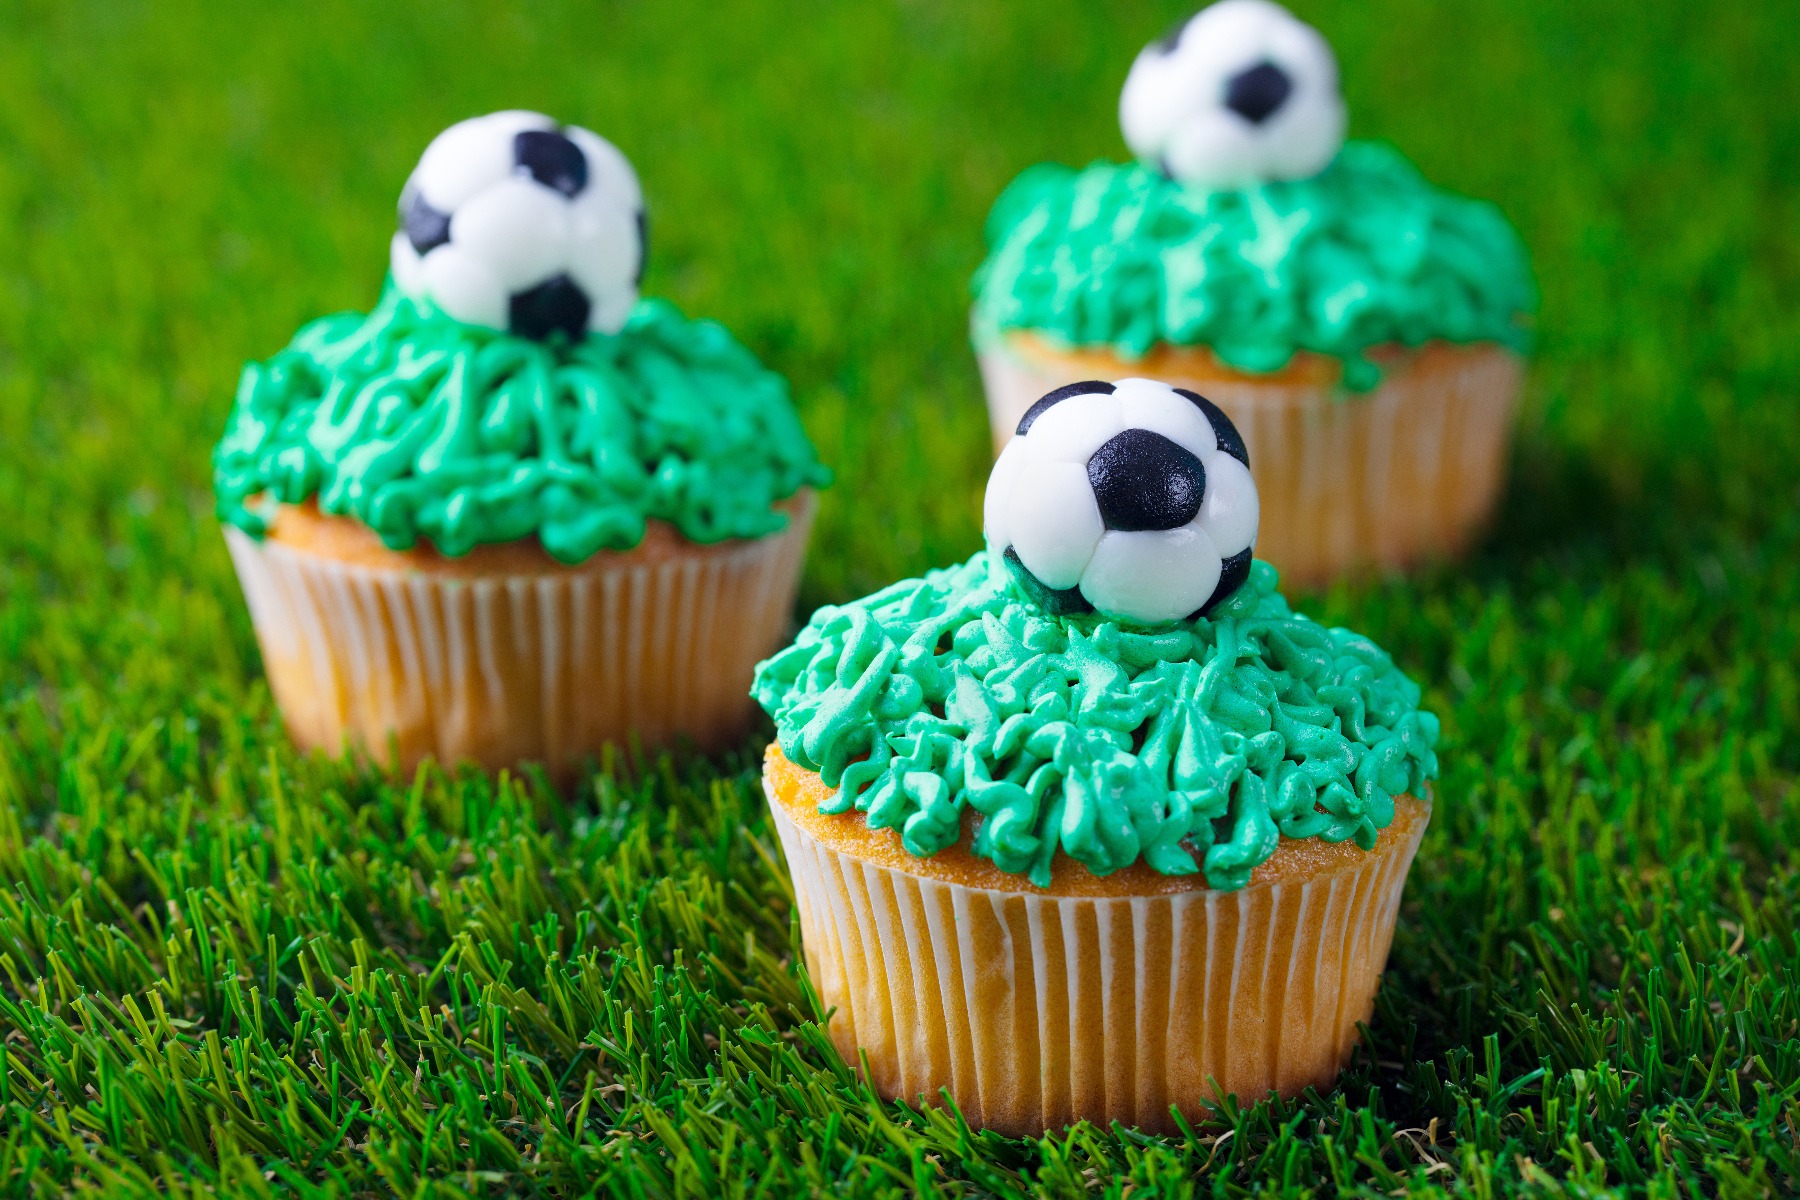 Some football cupcakes.